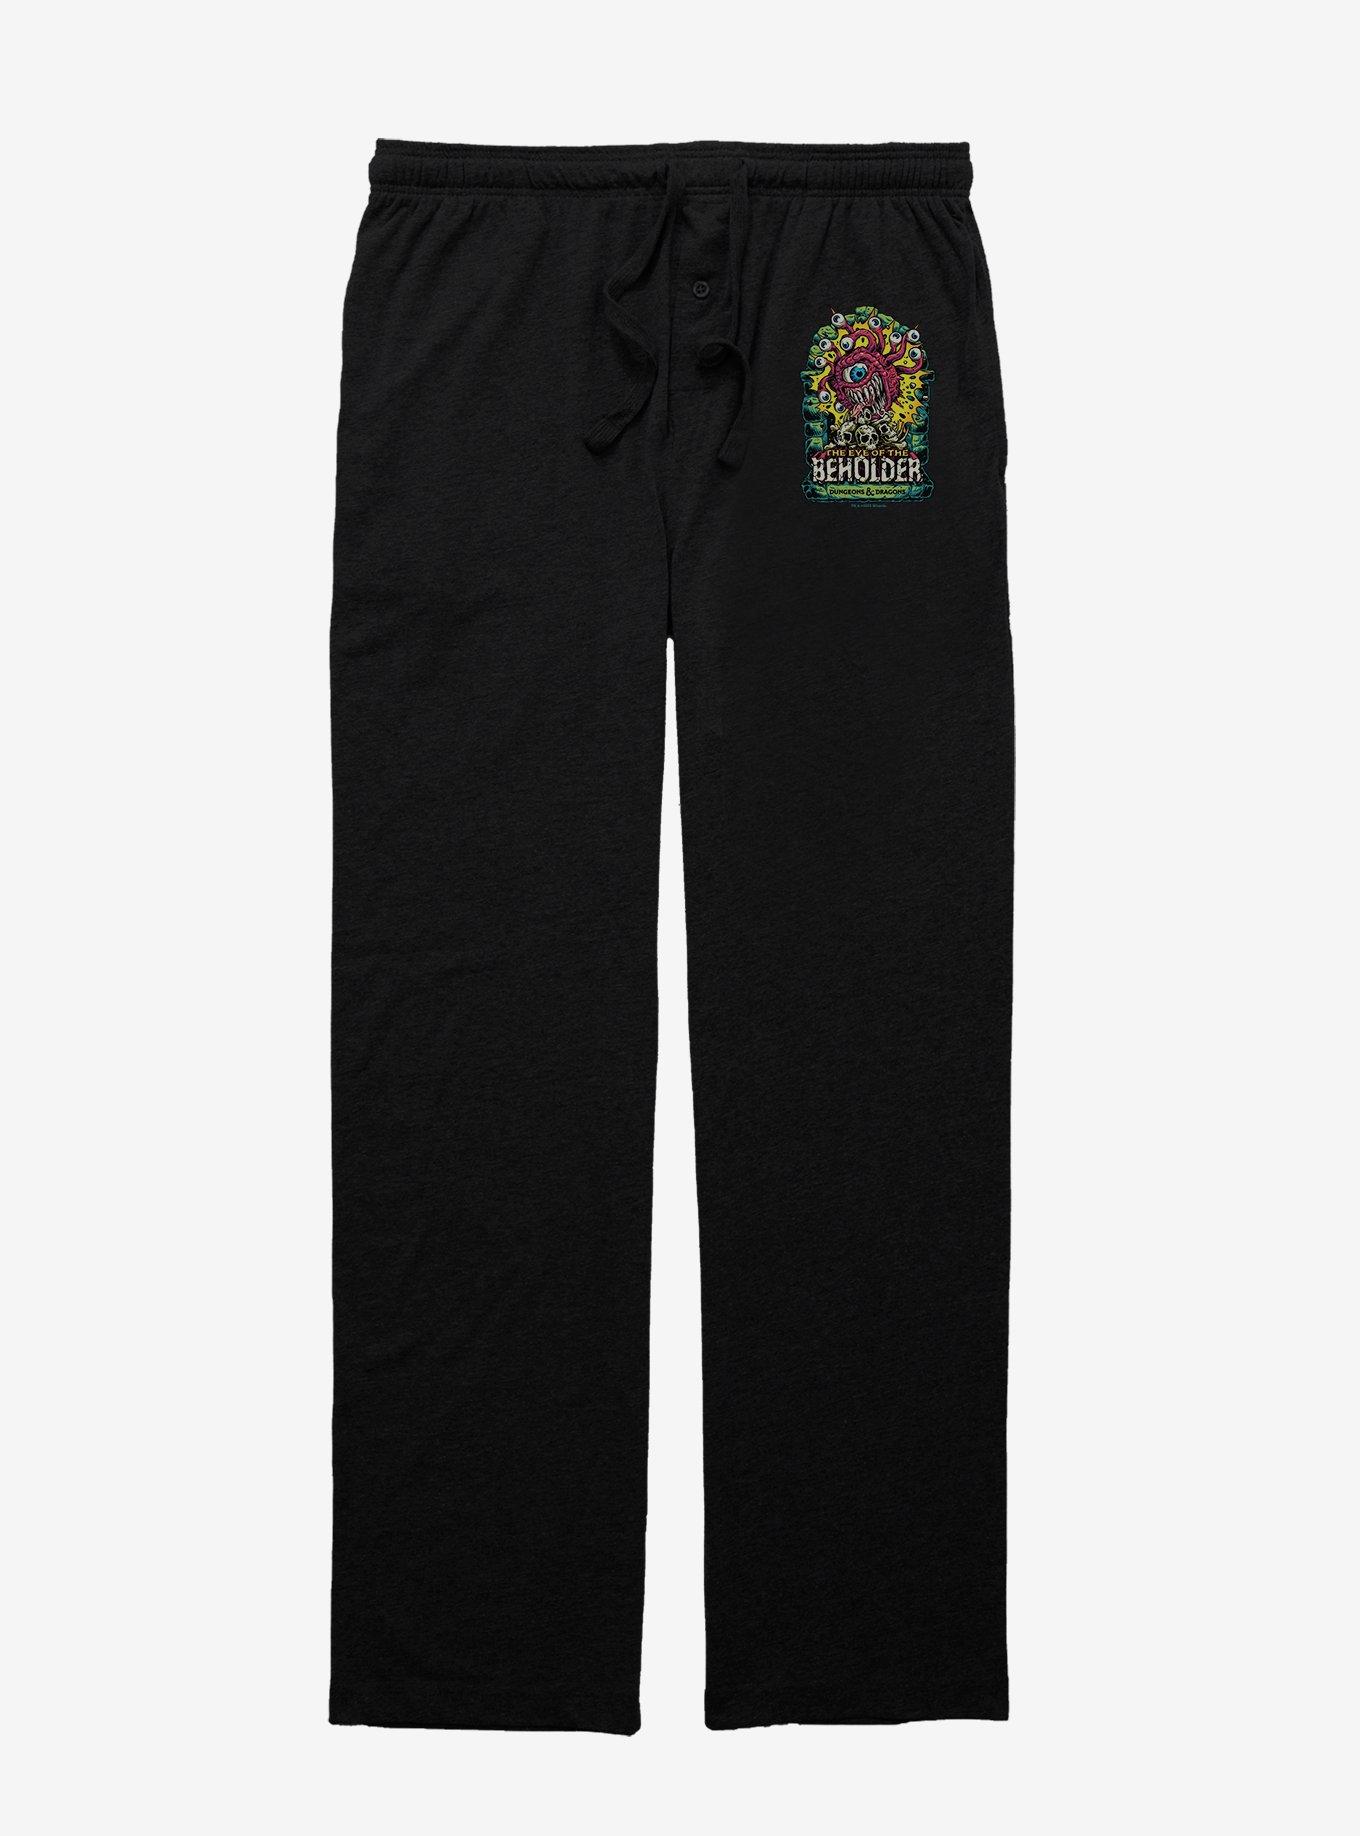 Dungeons And Dragons The Eye Of The Beholder Pajama Pants, BLACK, hi-res